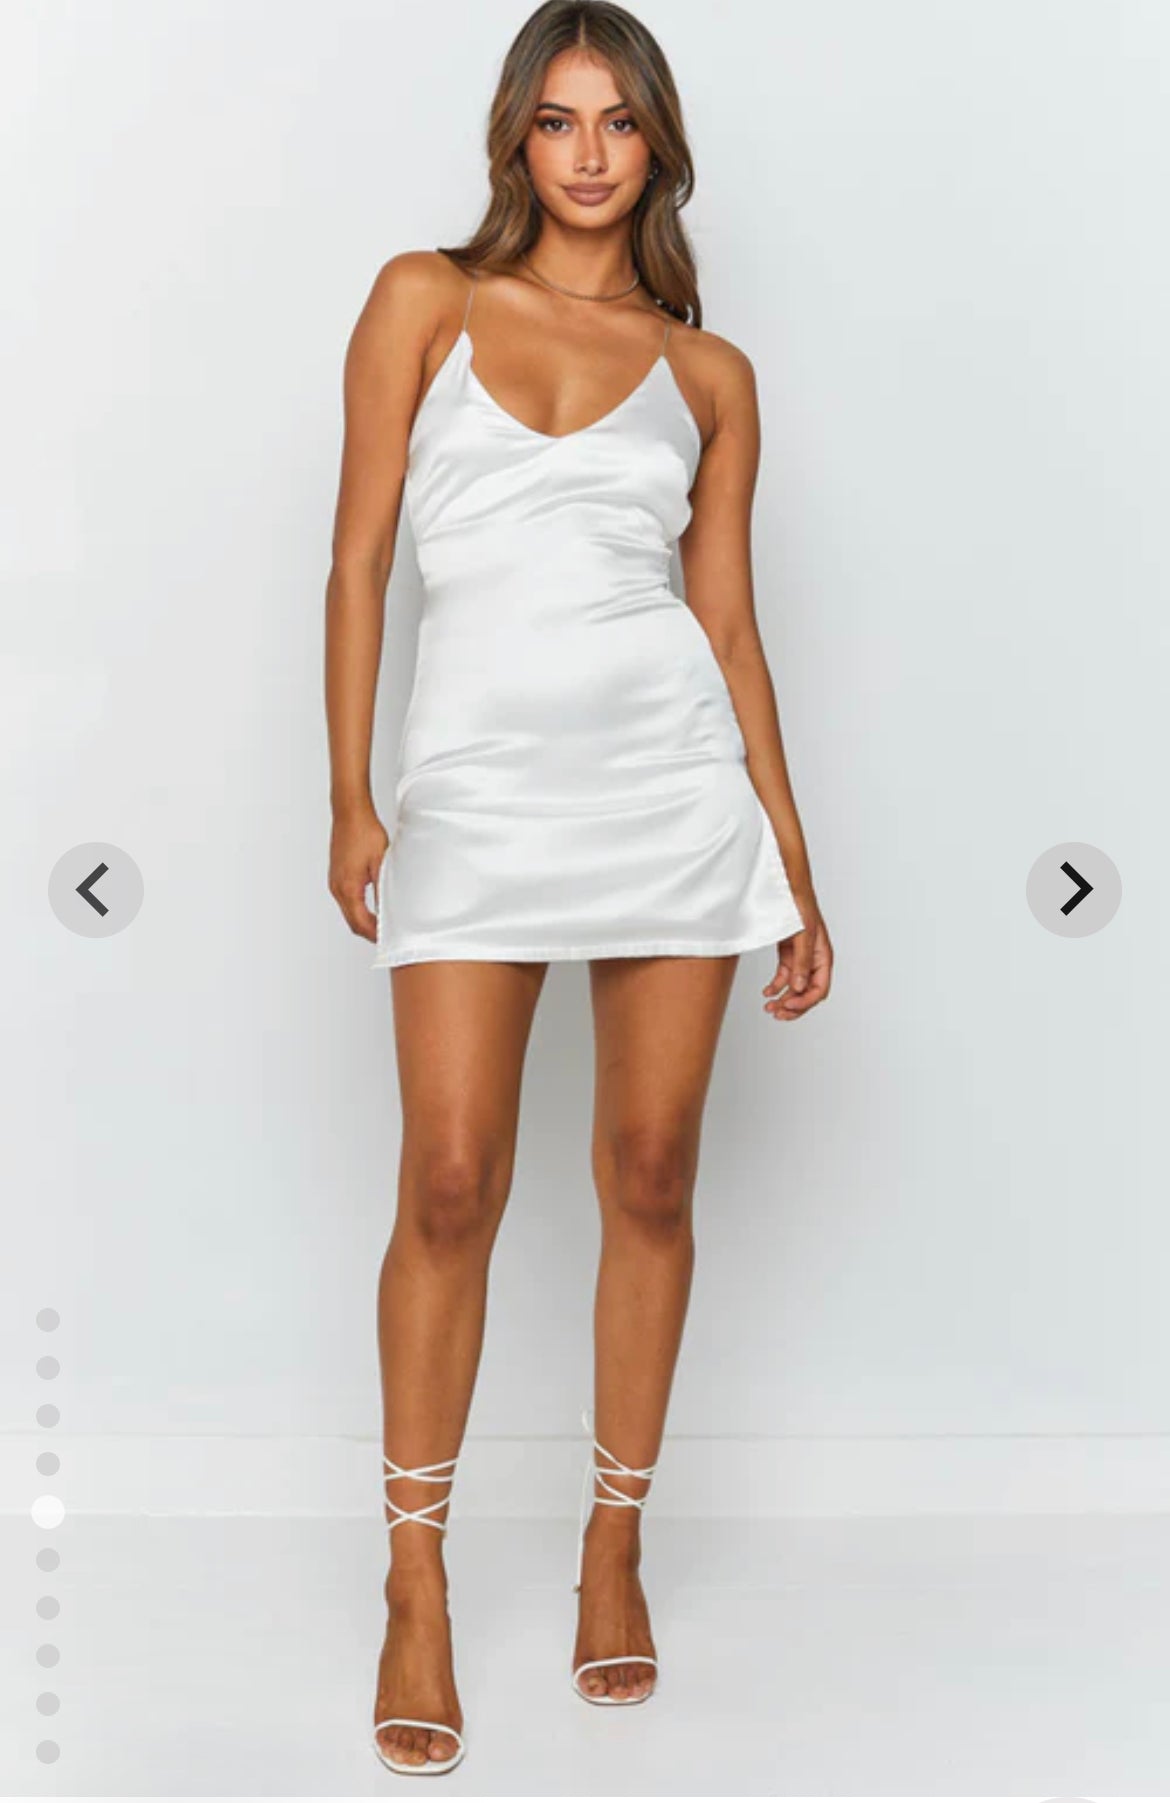 satin white mini dress for clubbing or party with tie up back and v neck . short dress. white strappy heels. front view